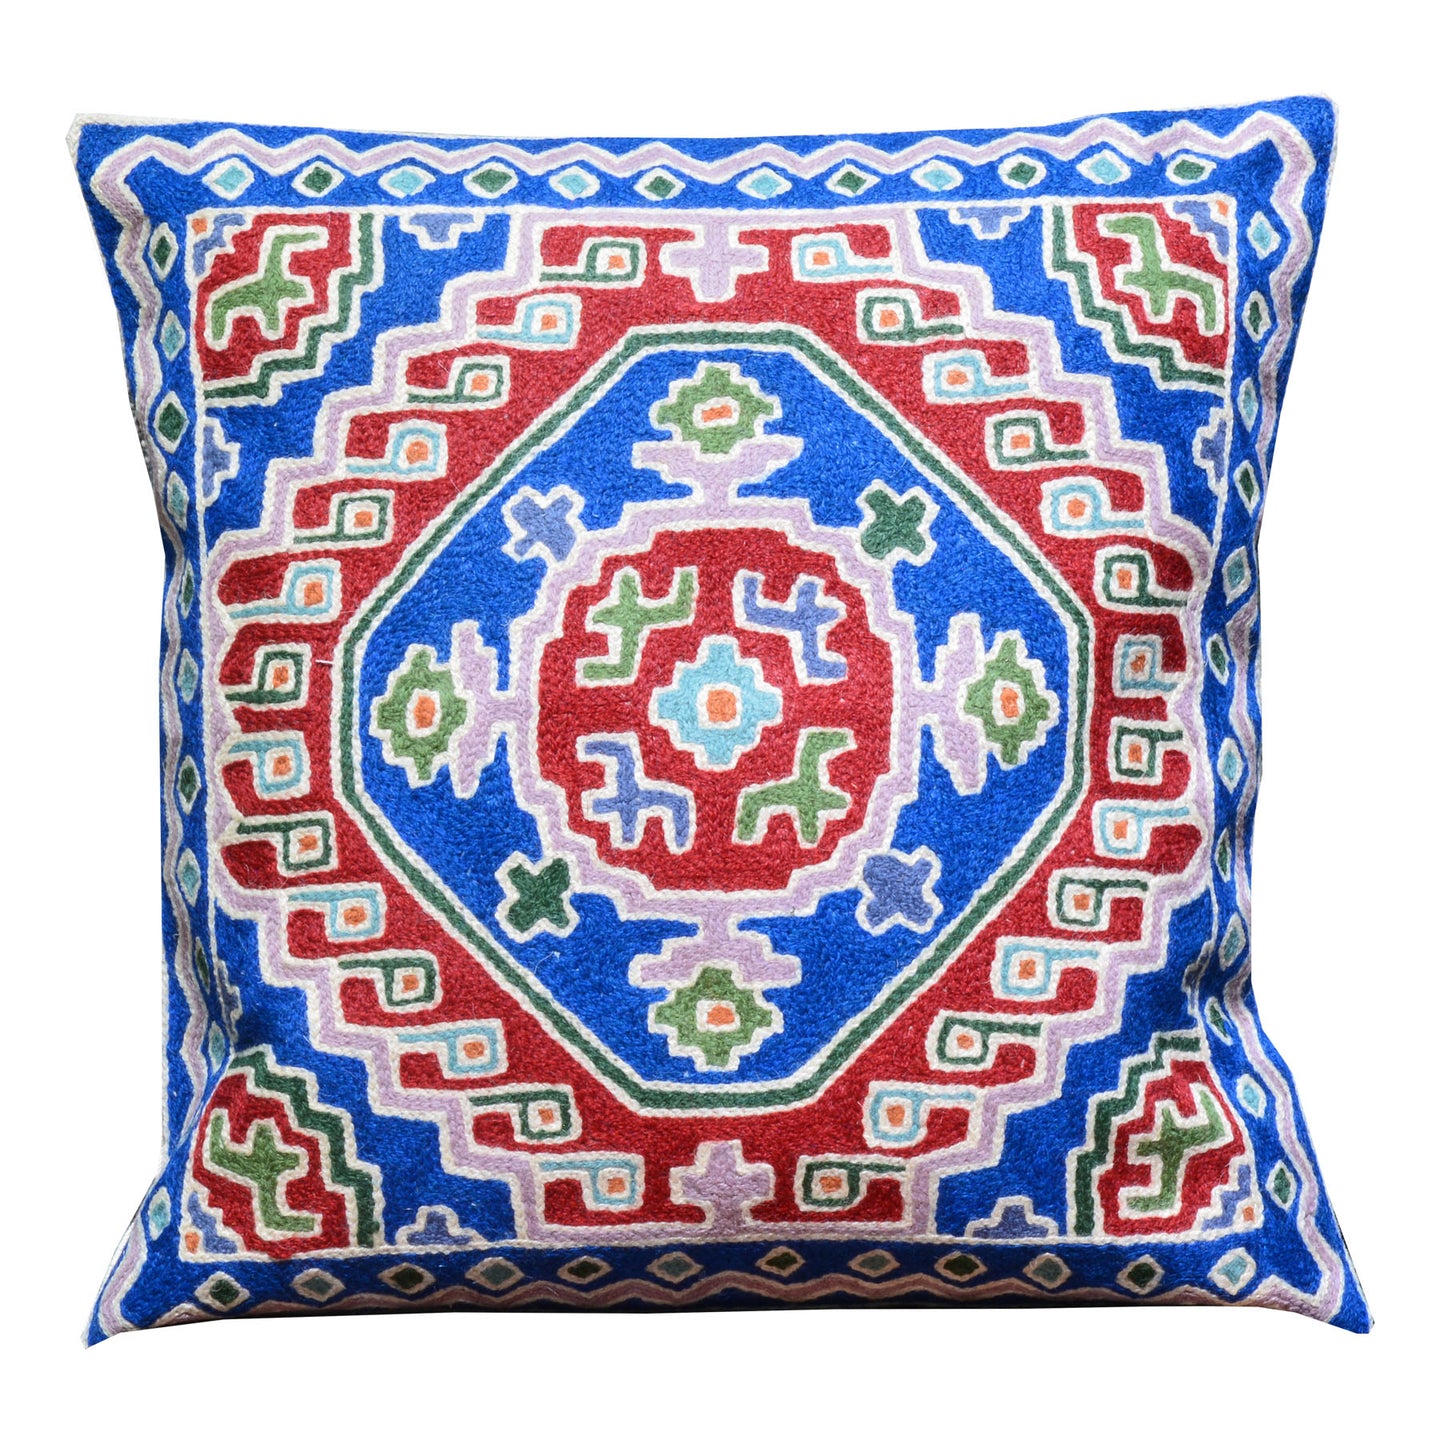 16 x 16 Traditional Floral Design Handmade Wool Pillow Cover Cwpal-9000